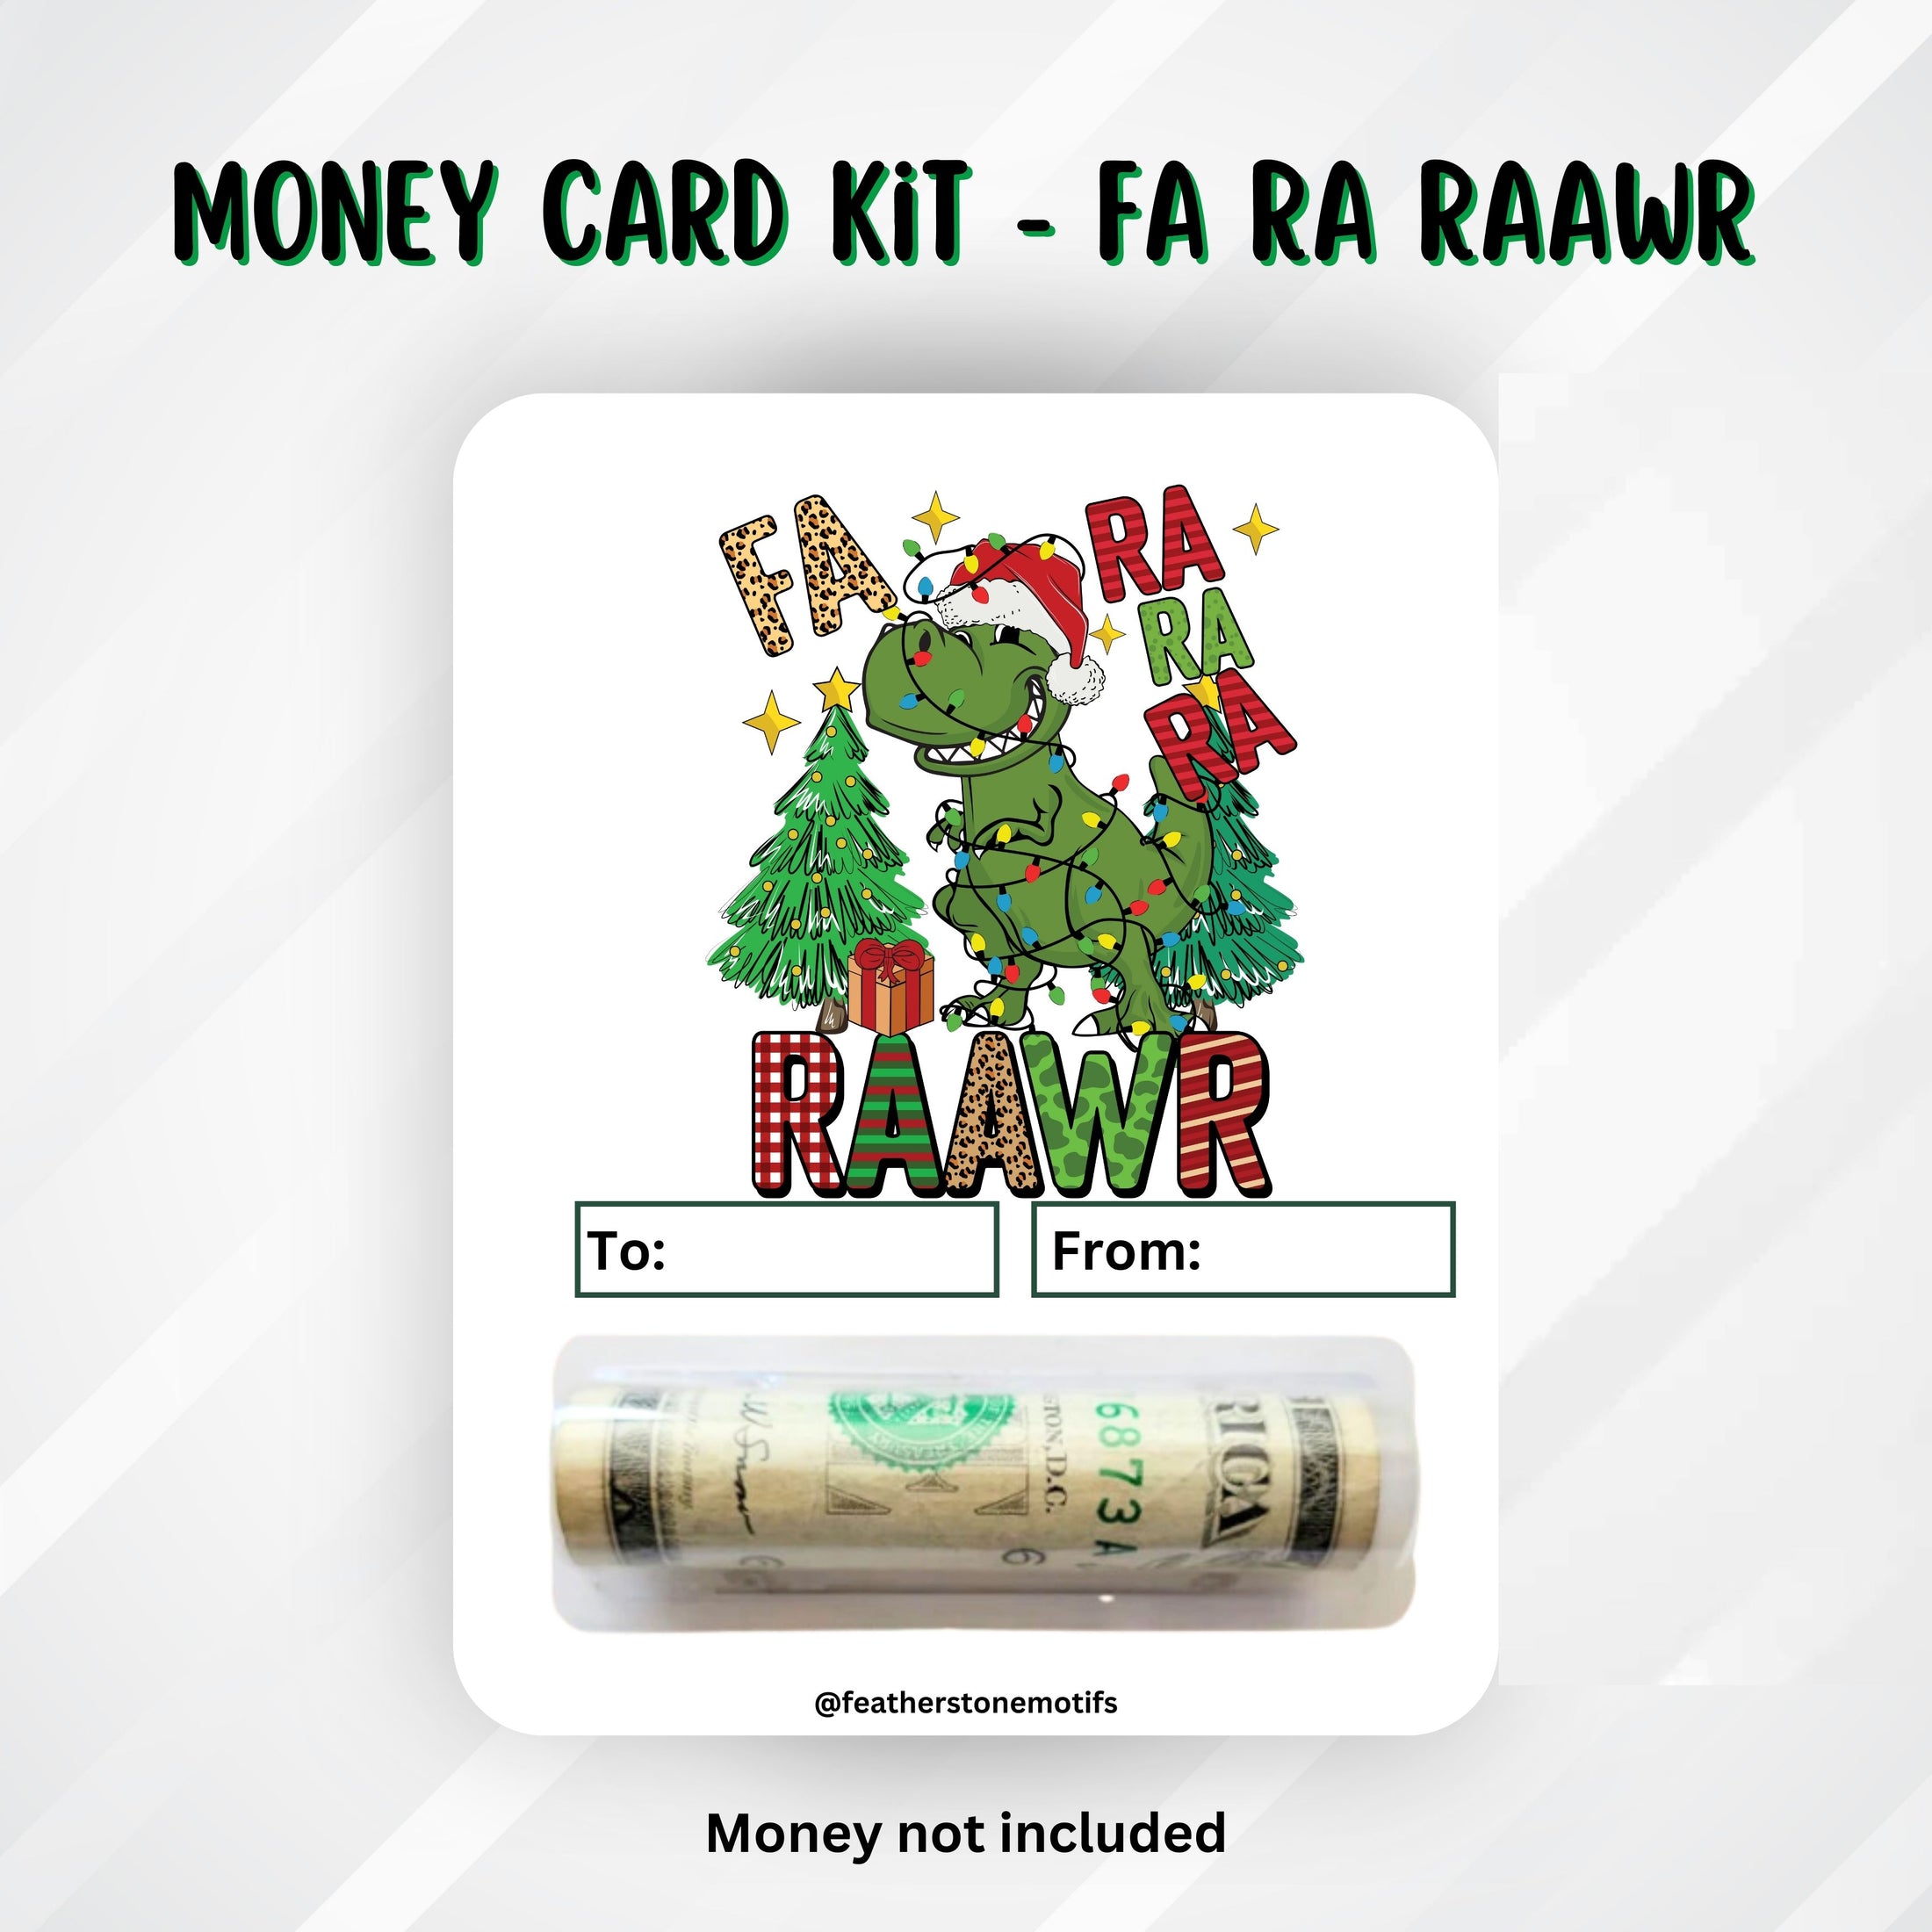 This image shows the money tube attached to the Fa Ra Raawr Money Card.